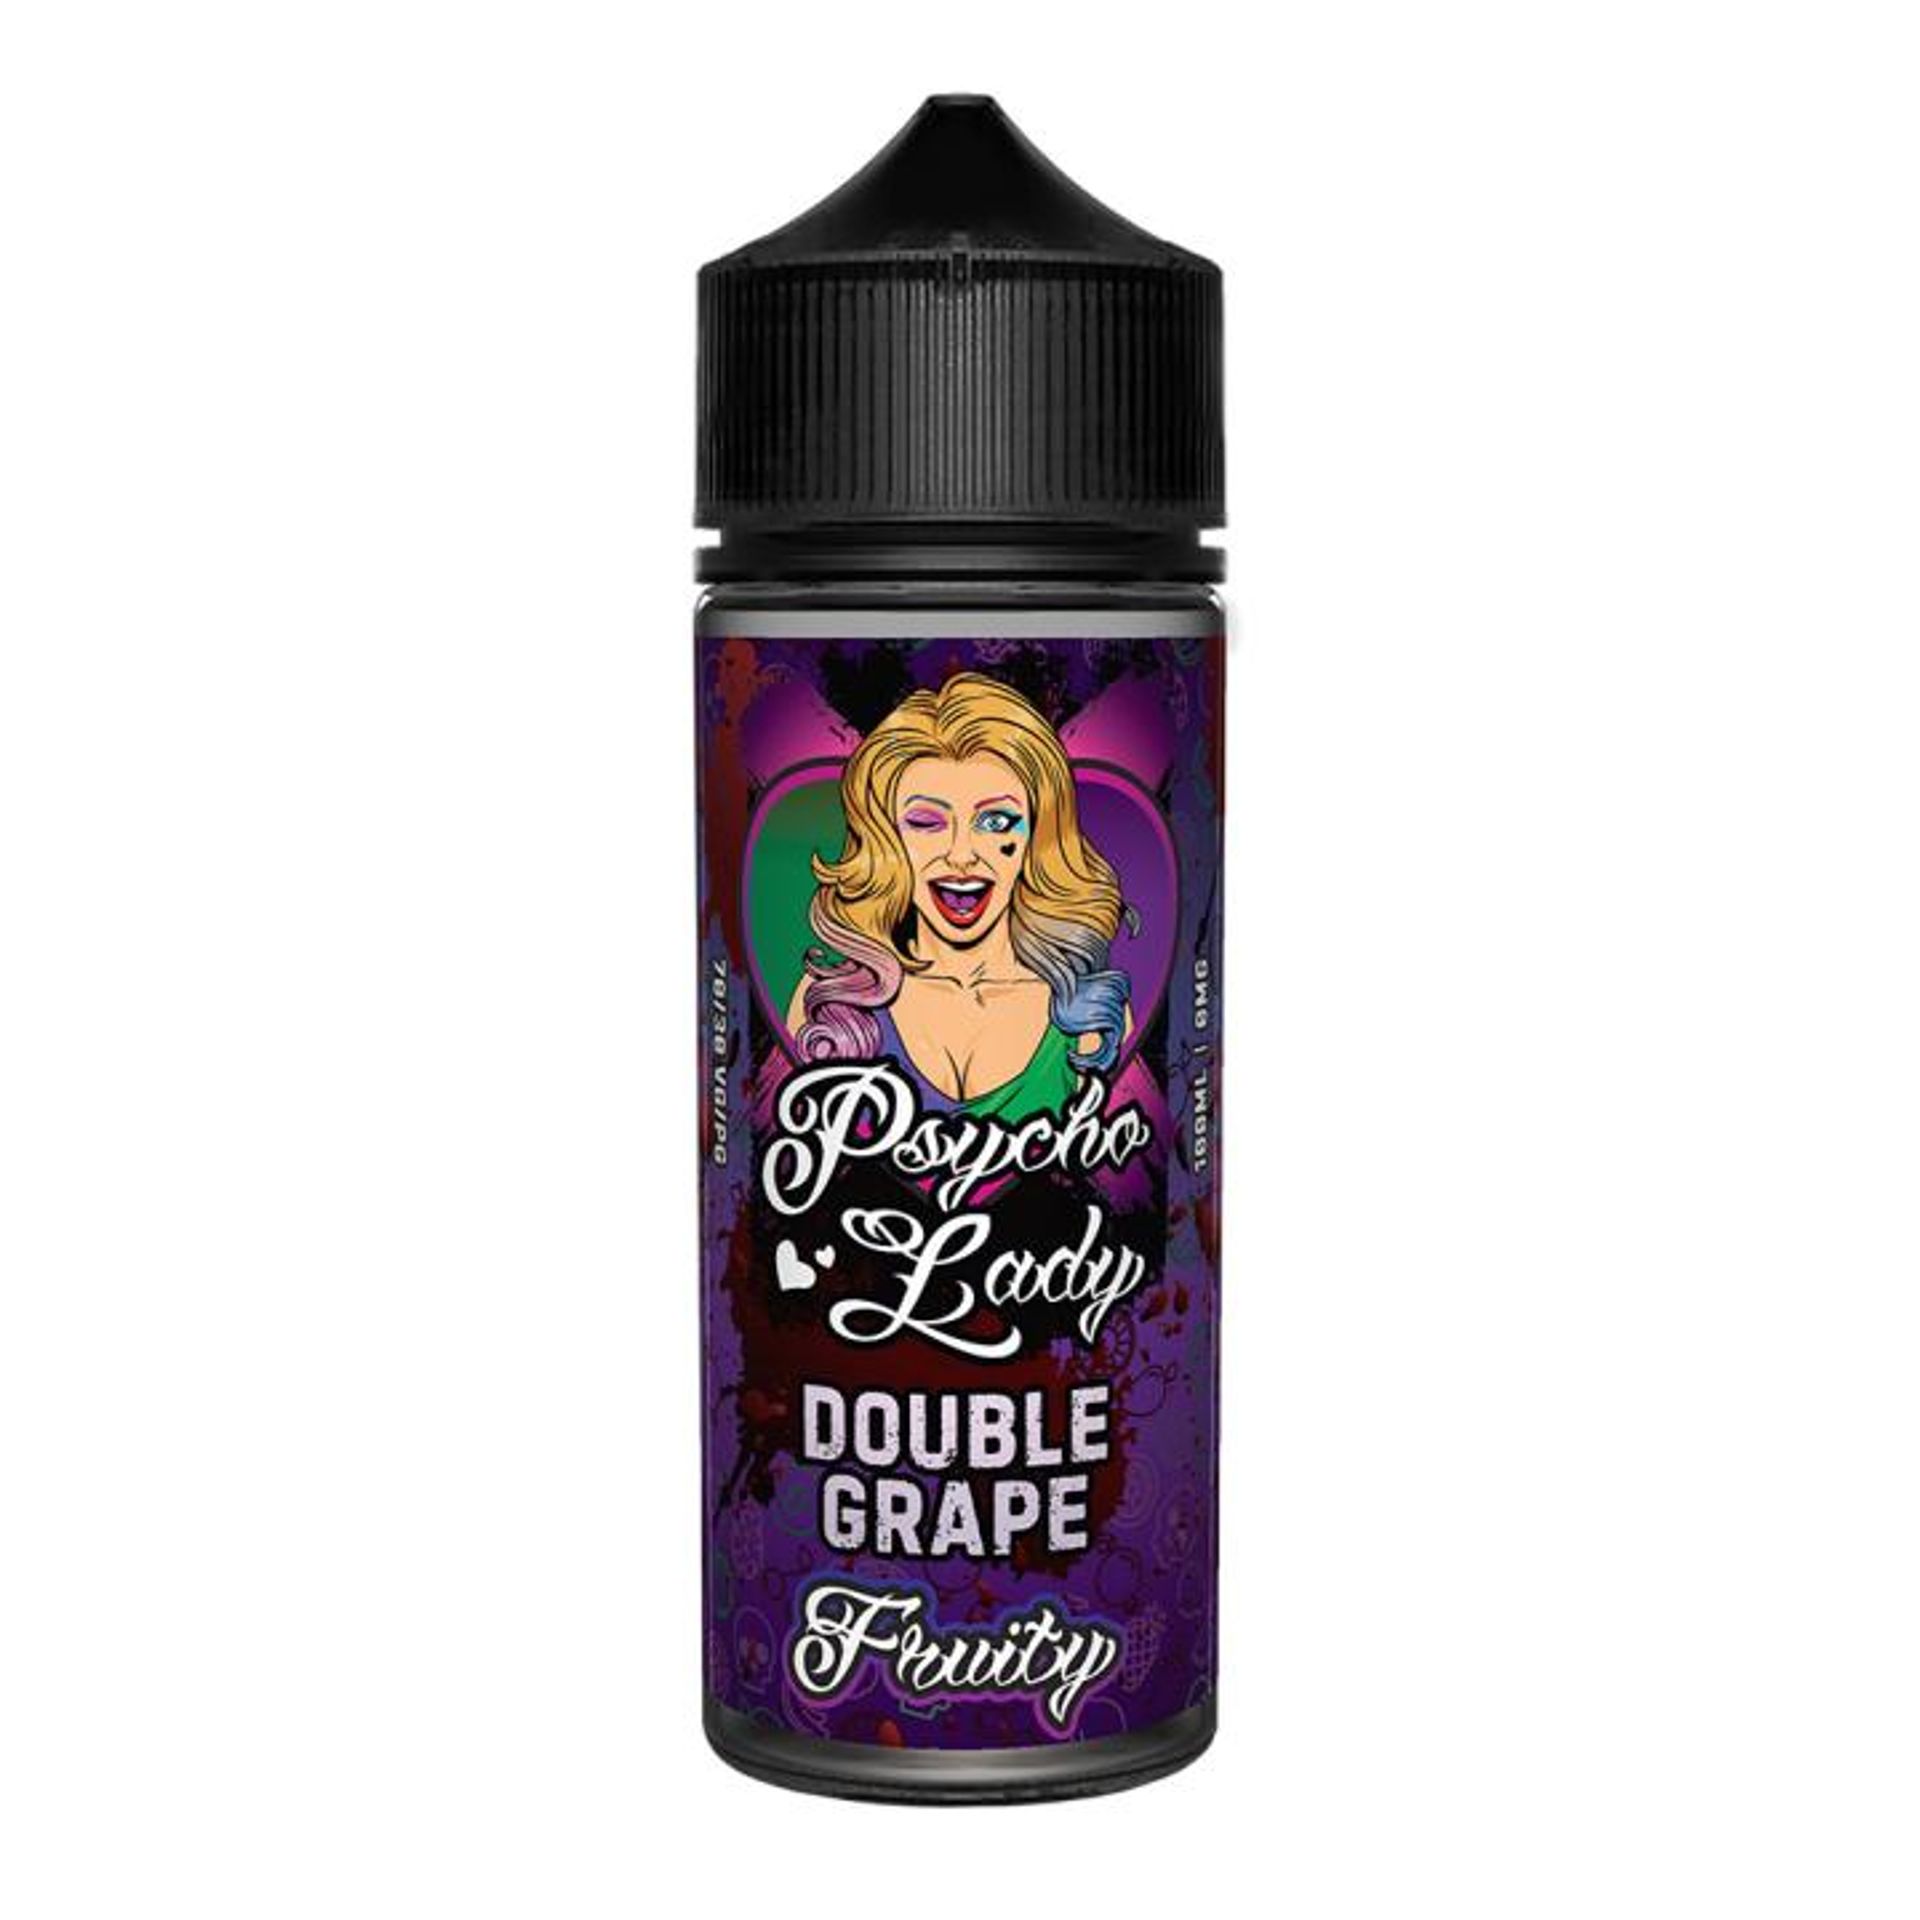 Image of Double Grape by Psycho Lady